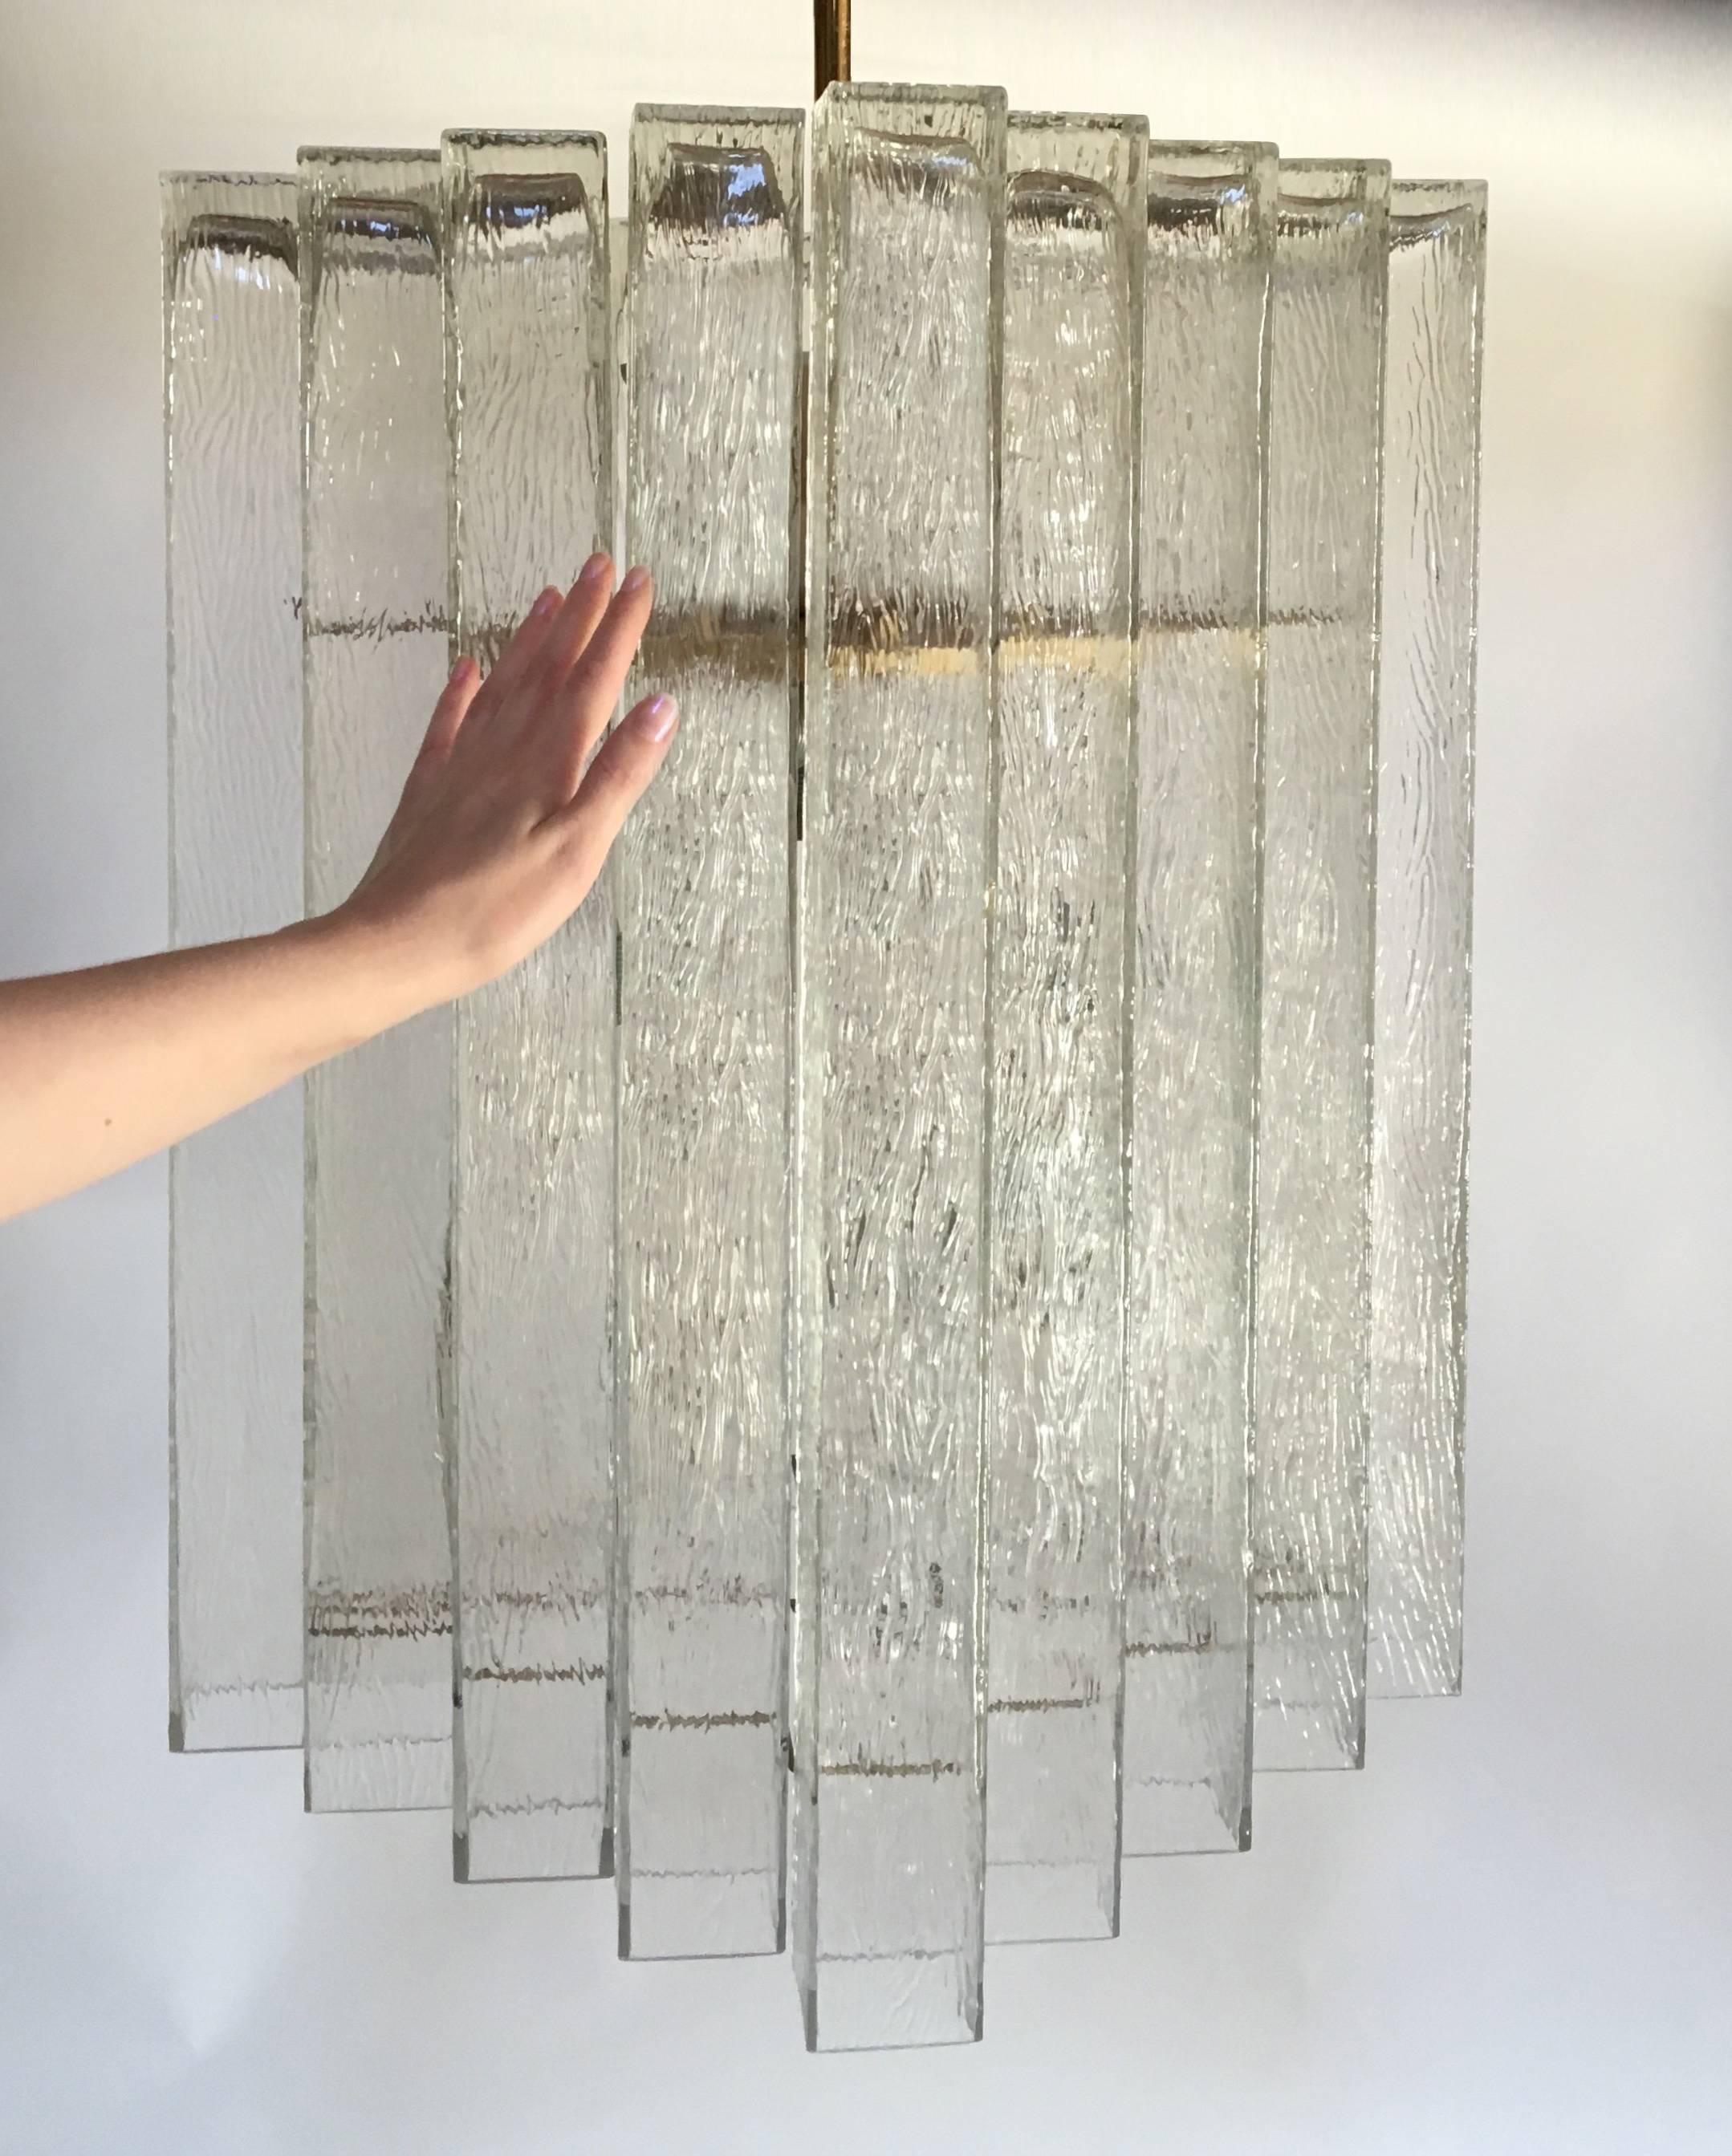 A chandelier consisting of multiple rectangular textured glass hung on a brass frame by Doria Leuchten, German, 1960s (two available).